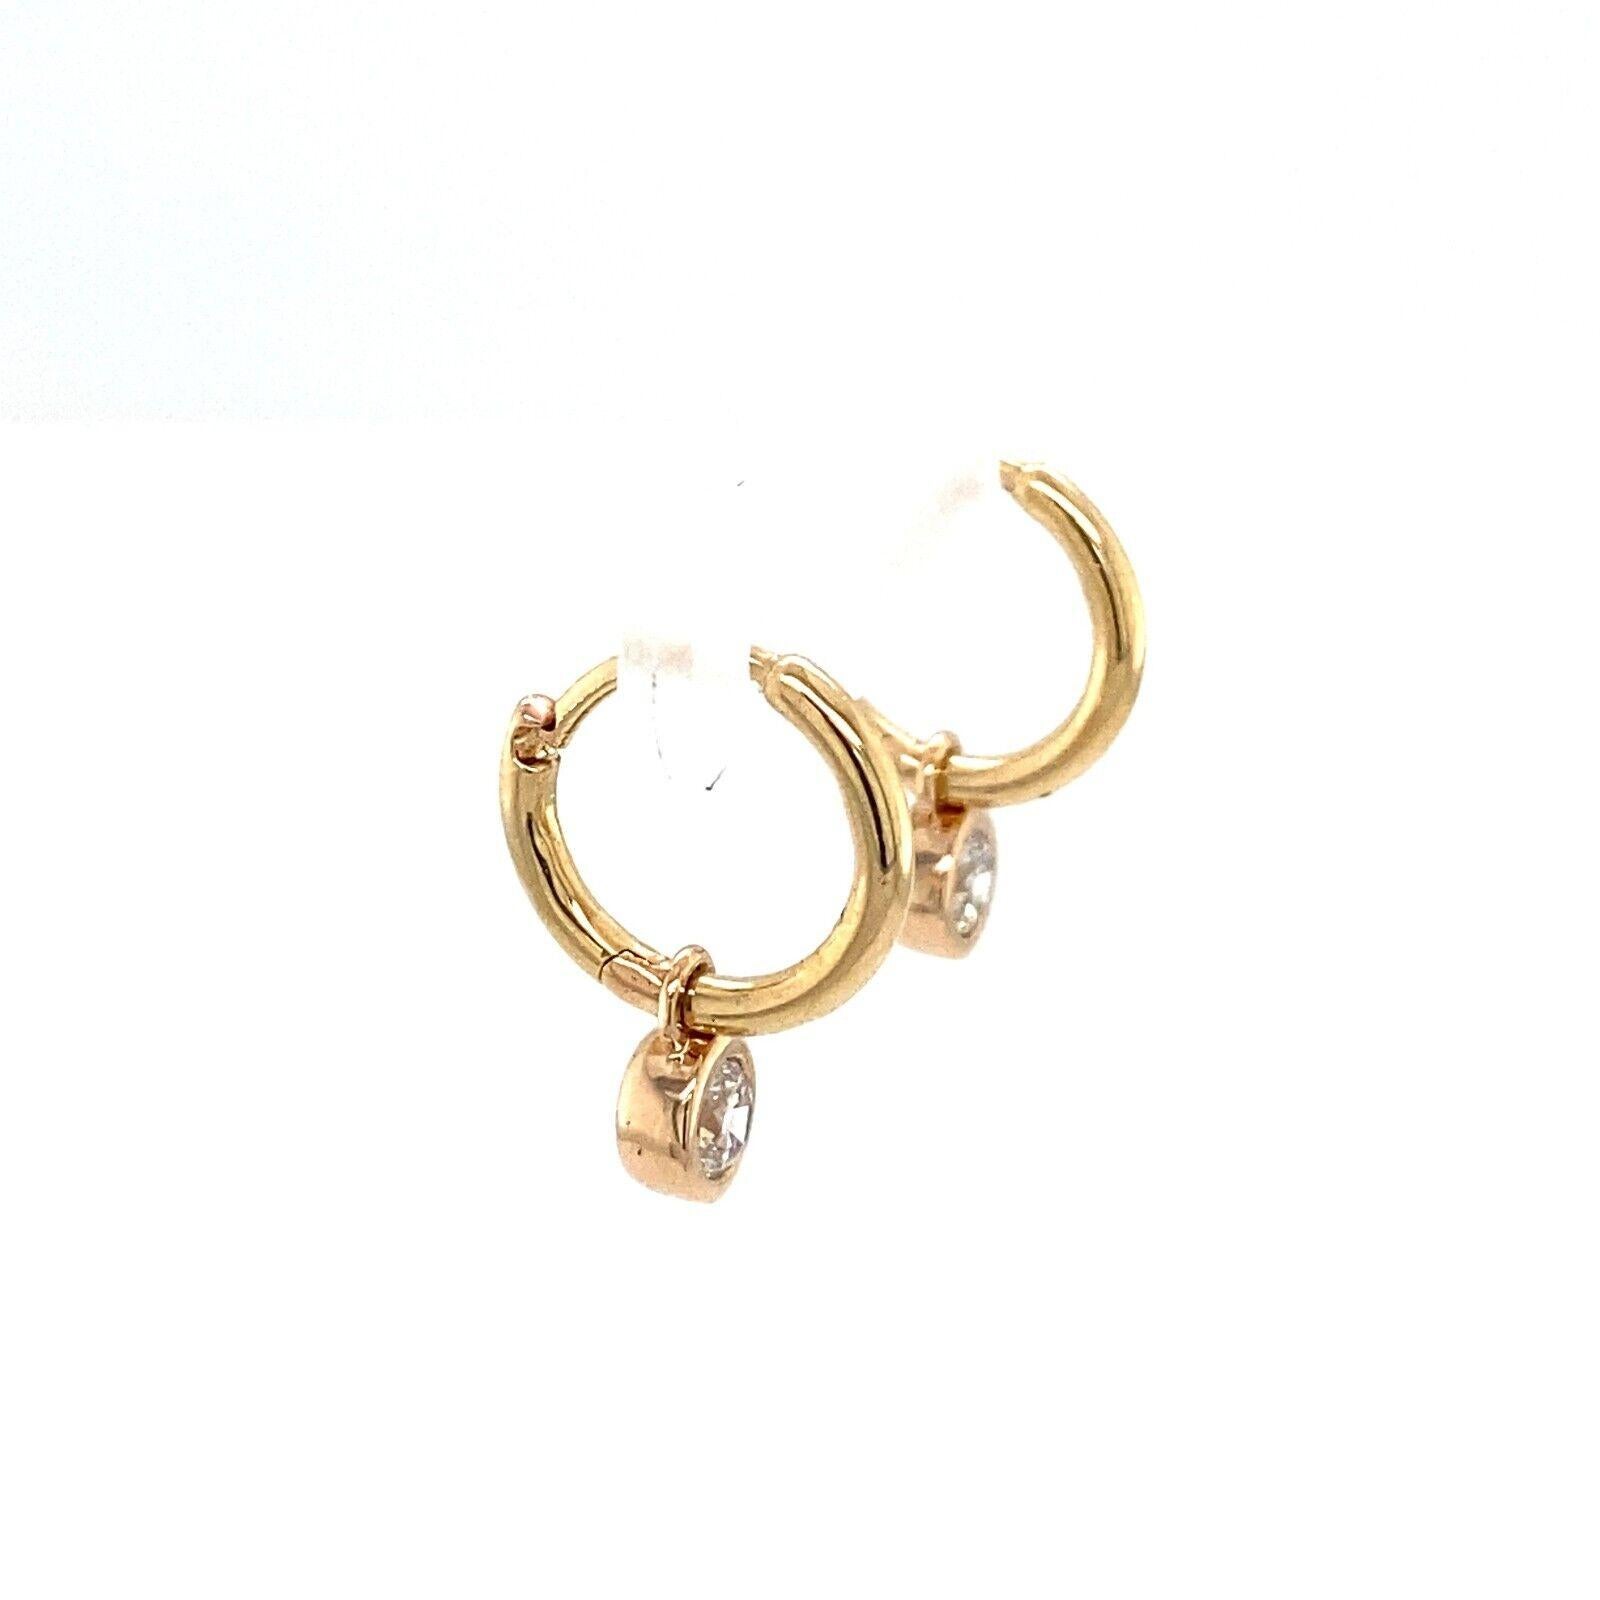 These stunning earrings are the perfect pair to add to your collection. These 14ct Yellow Gold hoop earrings have a total of 0.25ct Round Brilliant Cut Diamonds is set in a bezel setting and attached to the hoop plain earring.

Additional